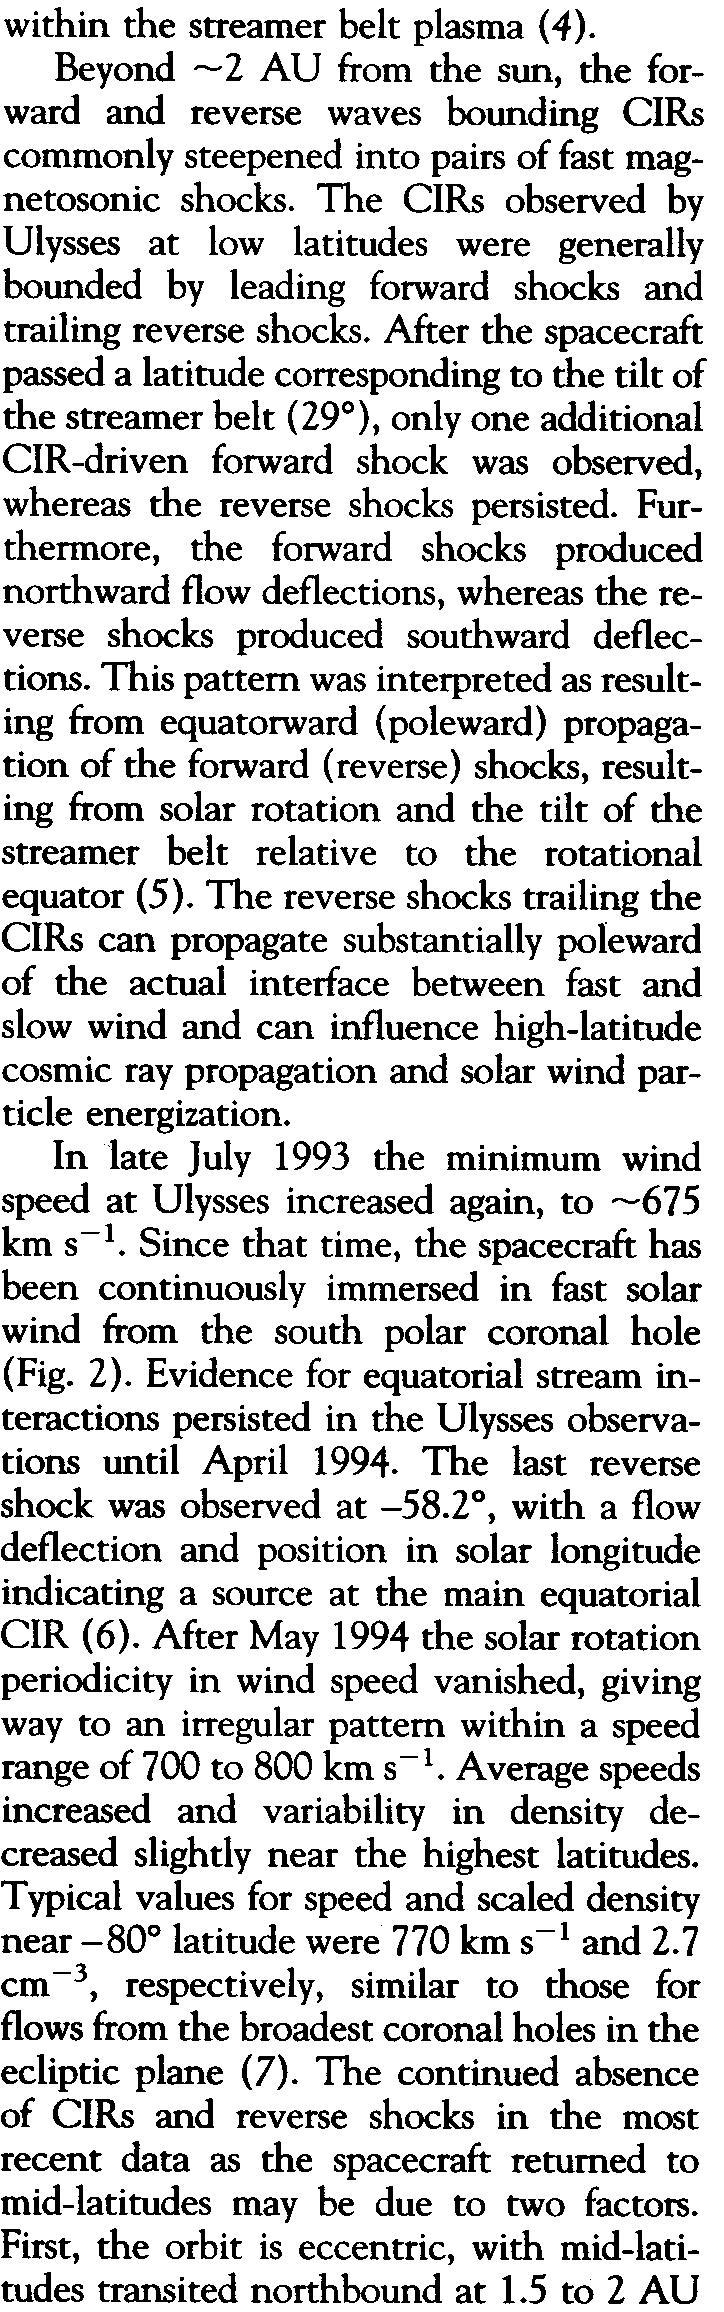 Proton temperature was higher and the electron strahl was broader at higher latitudes. The high-iatitude wind contained compressional, pressure-balanced, and Alfvenic structures. The solar wind is.